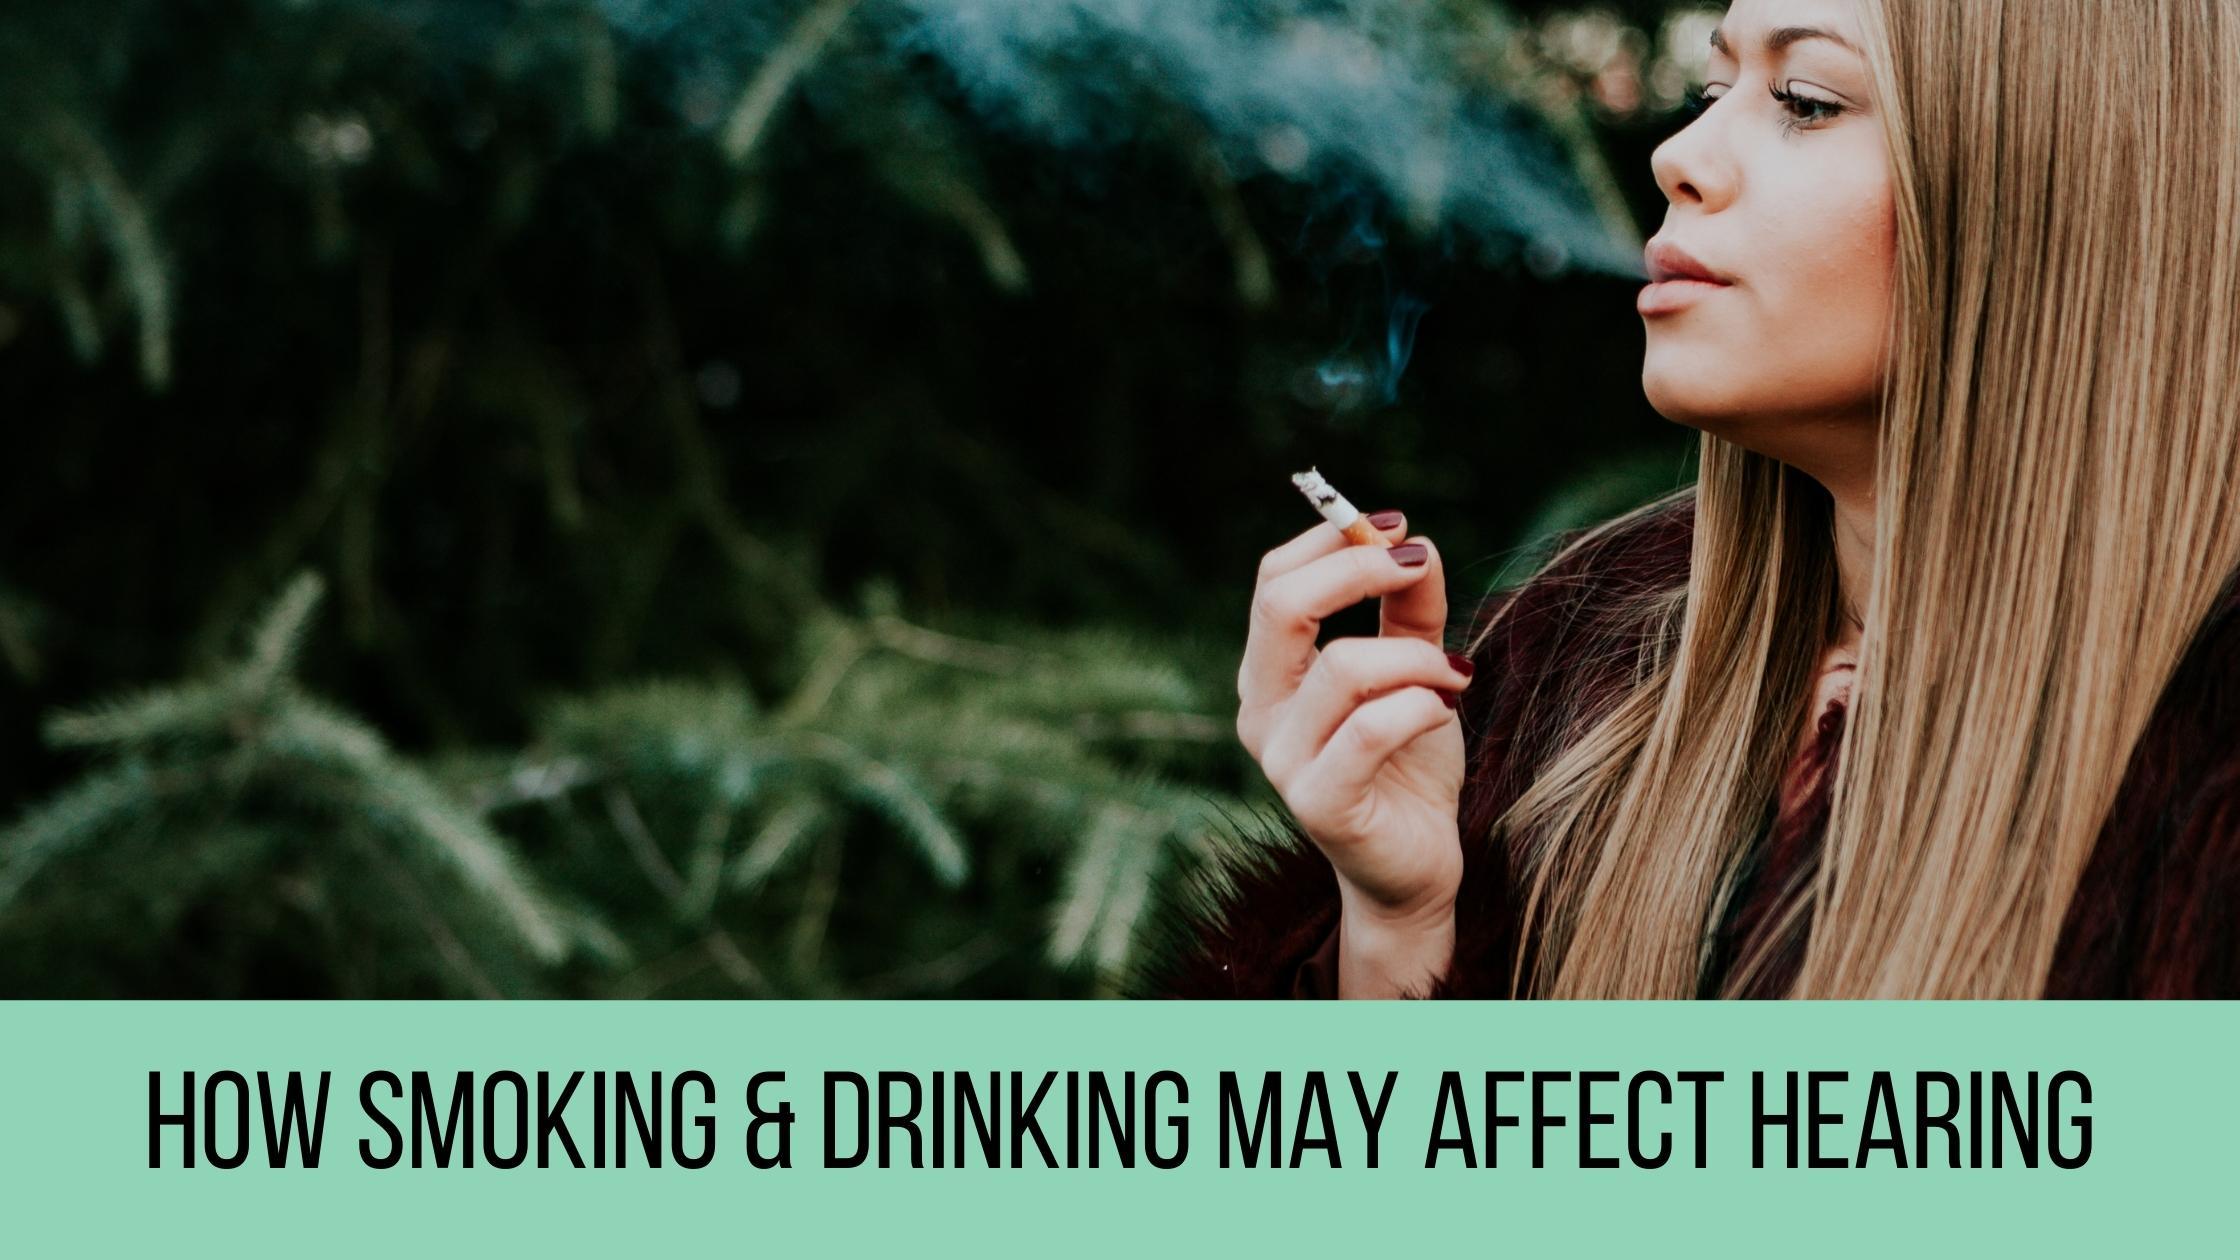 Featured image for “How Smoking & Drinking May Affect Hearing”